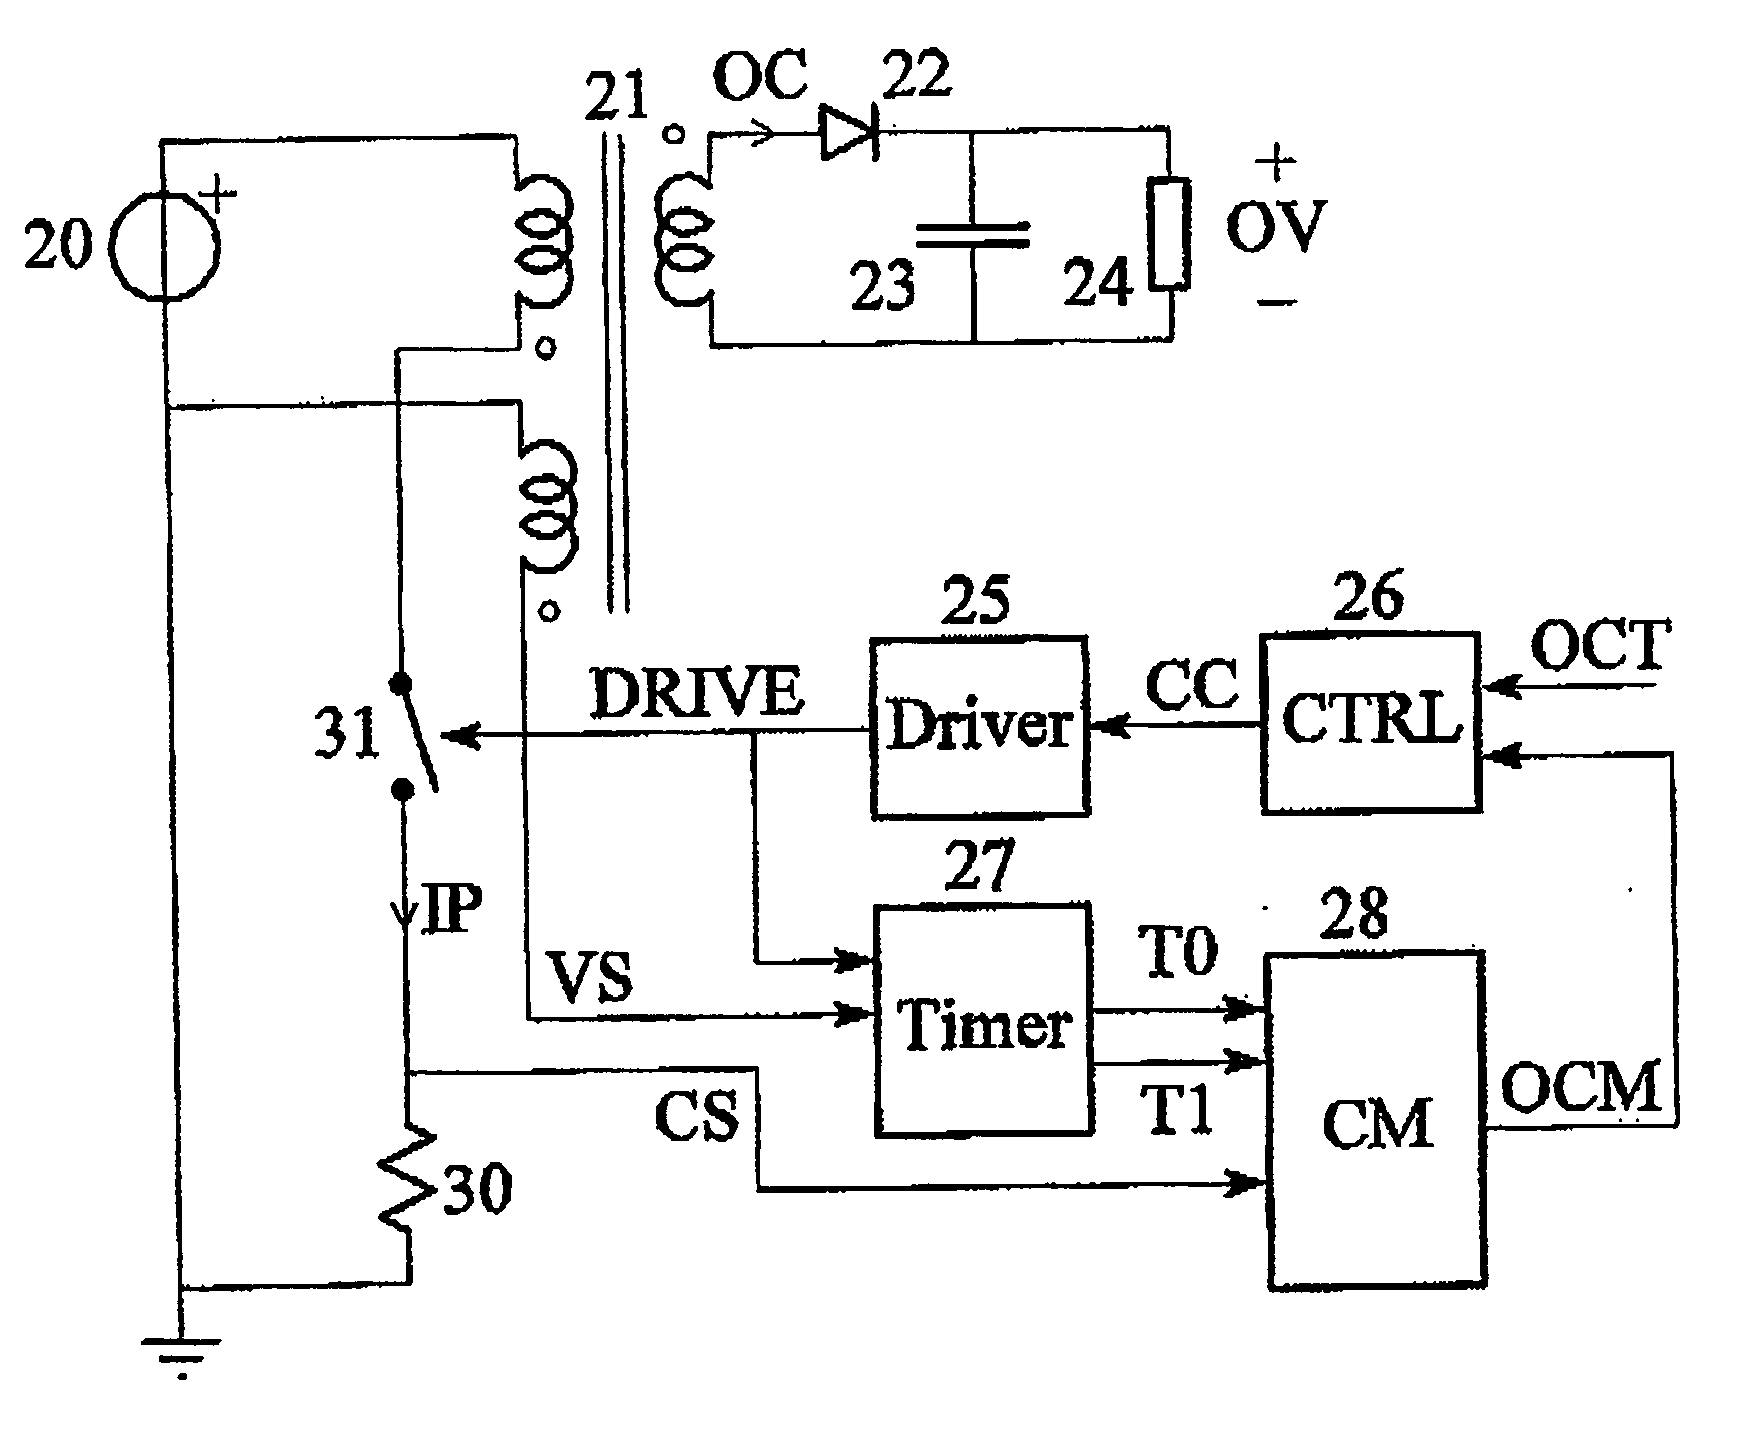 Switch mode power supply systems